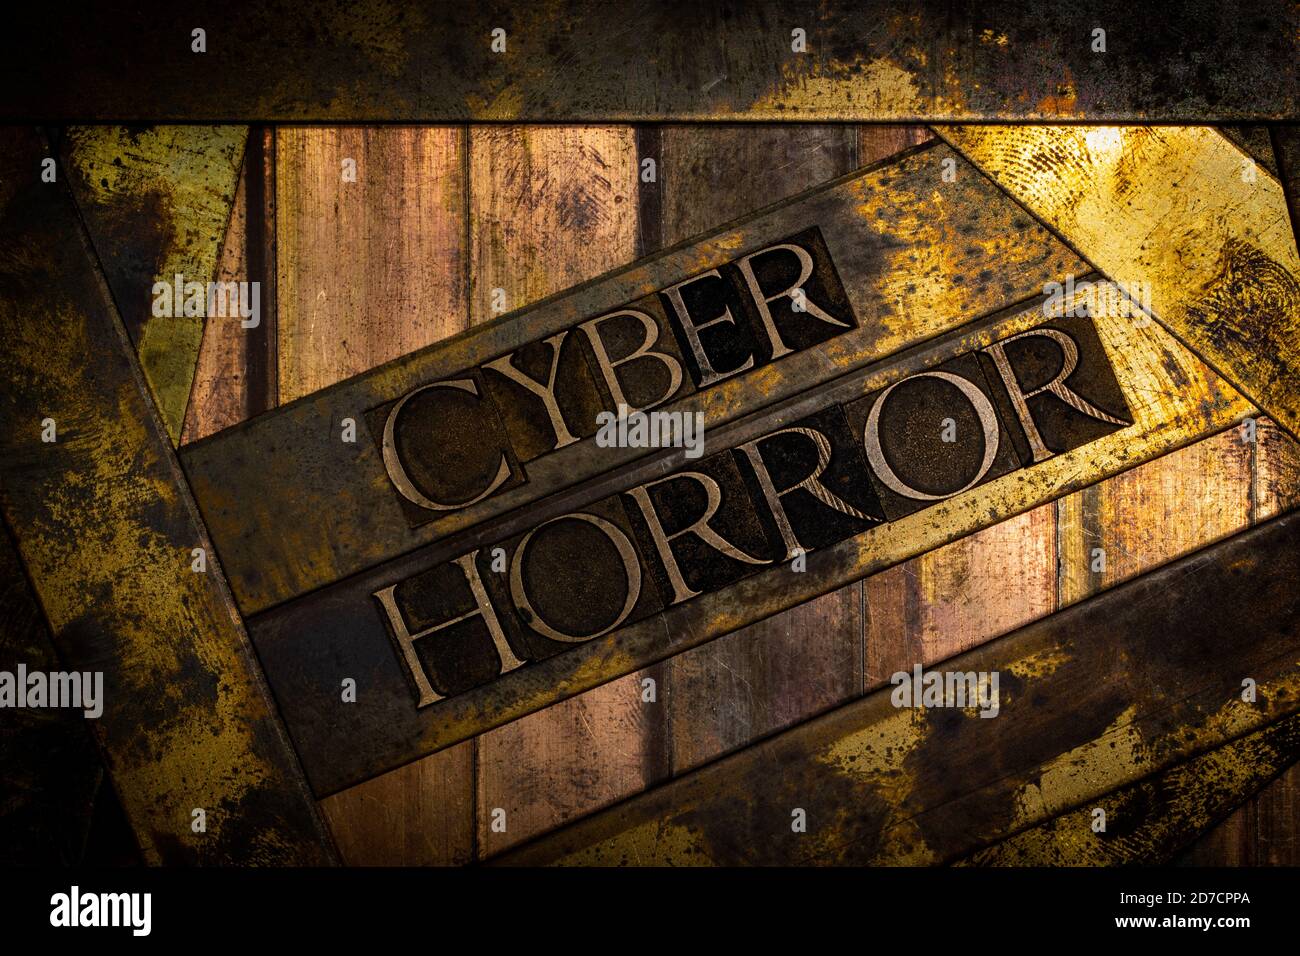 Cyber Horror text message on vintage textured grunge copper and gold background Stock Photo